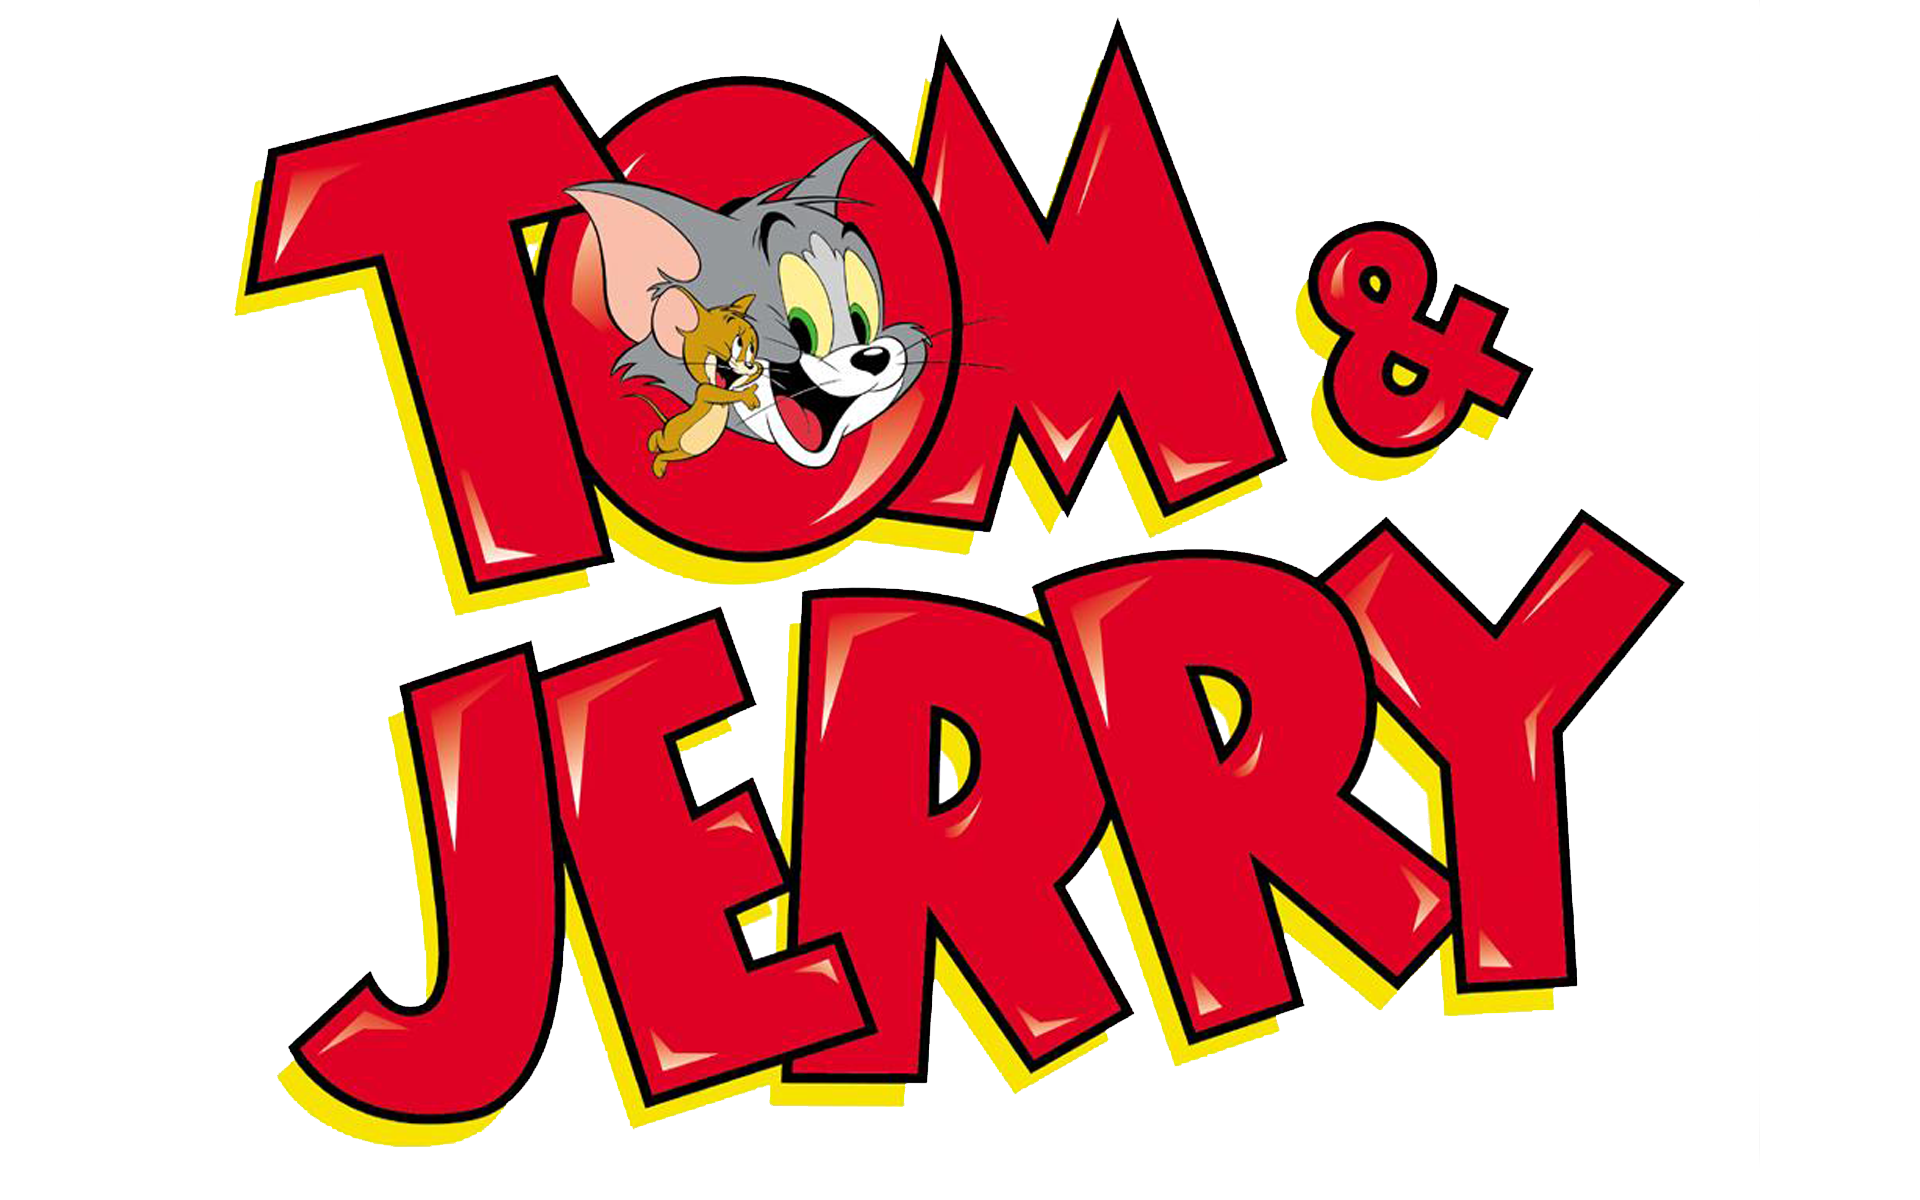 Tom And Jerry Cartoon Logo PNG Image - PurePNG | Free transparent CC0 PNG  Image Library